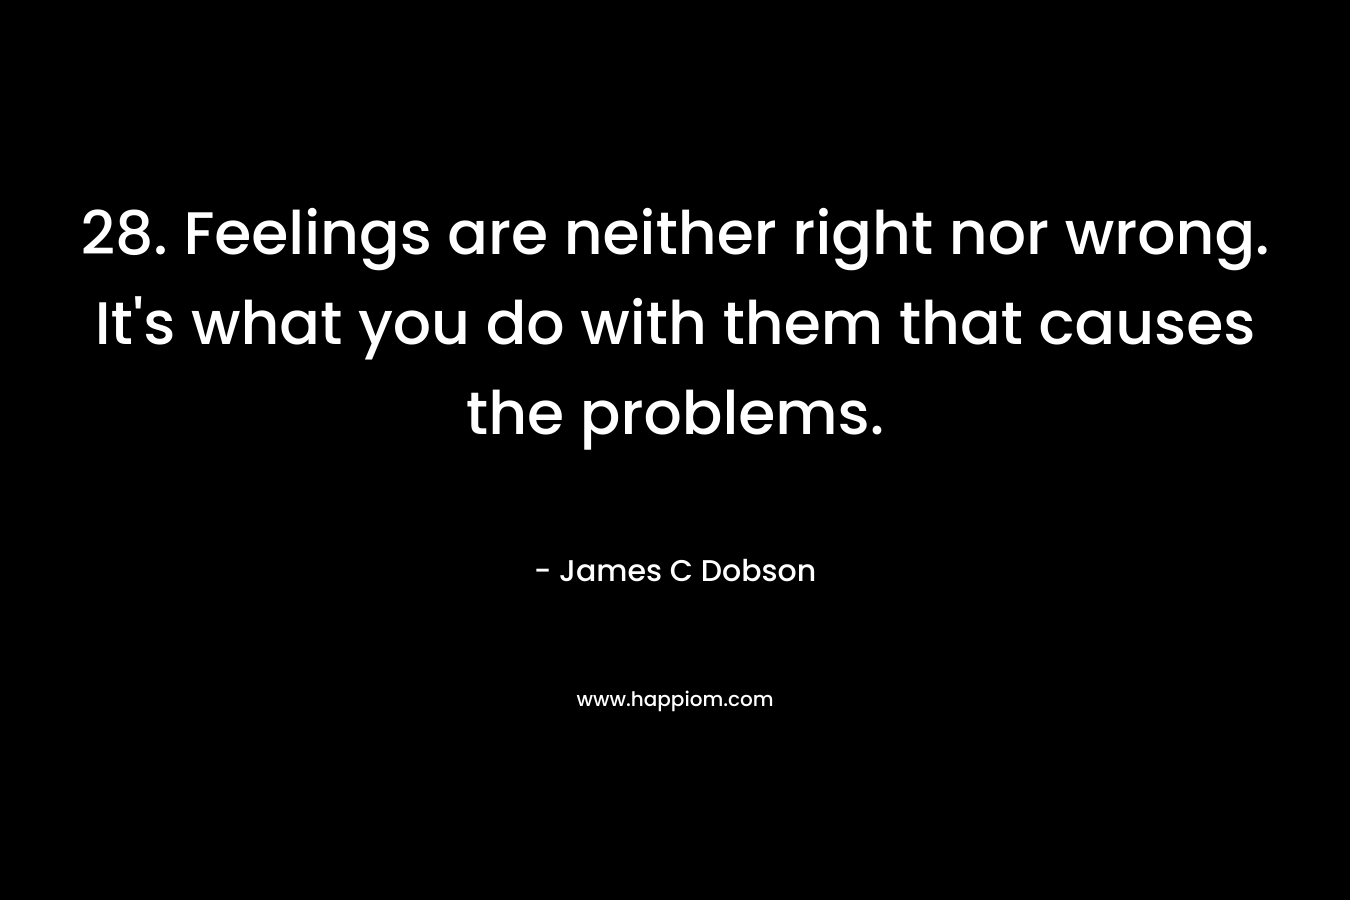 28. Feelings are neither right nor wrong. It's what you do with them that causes the problems.